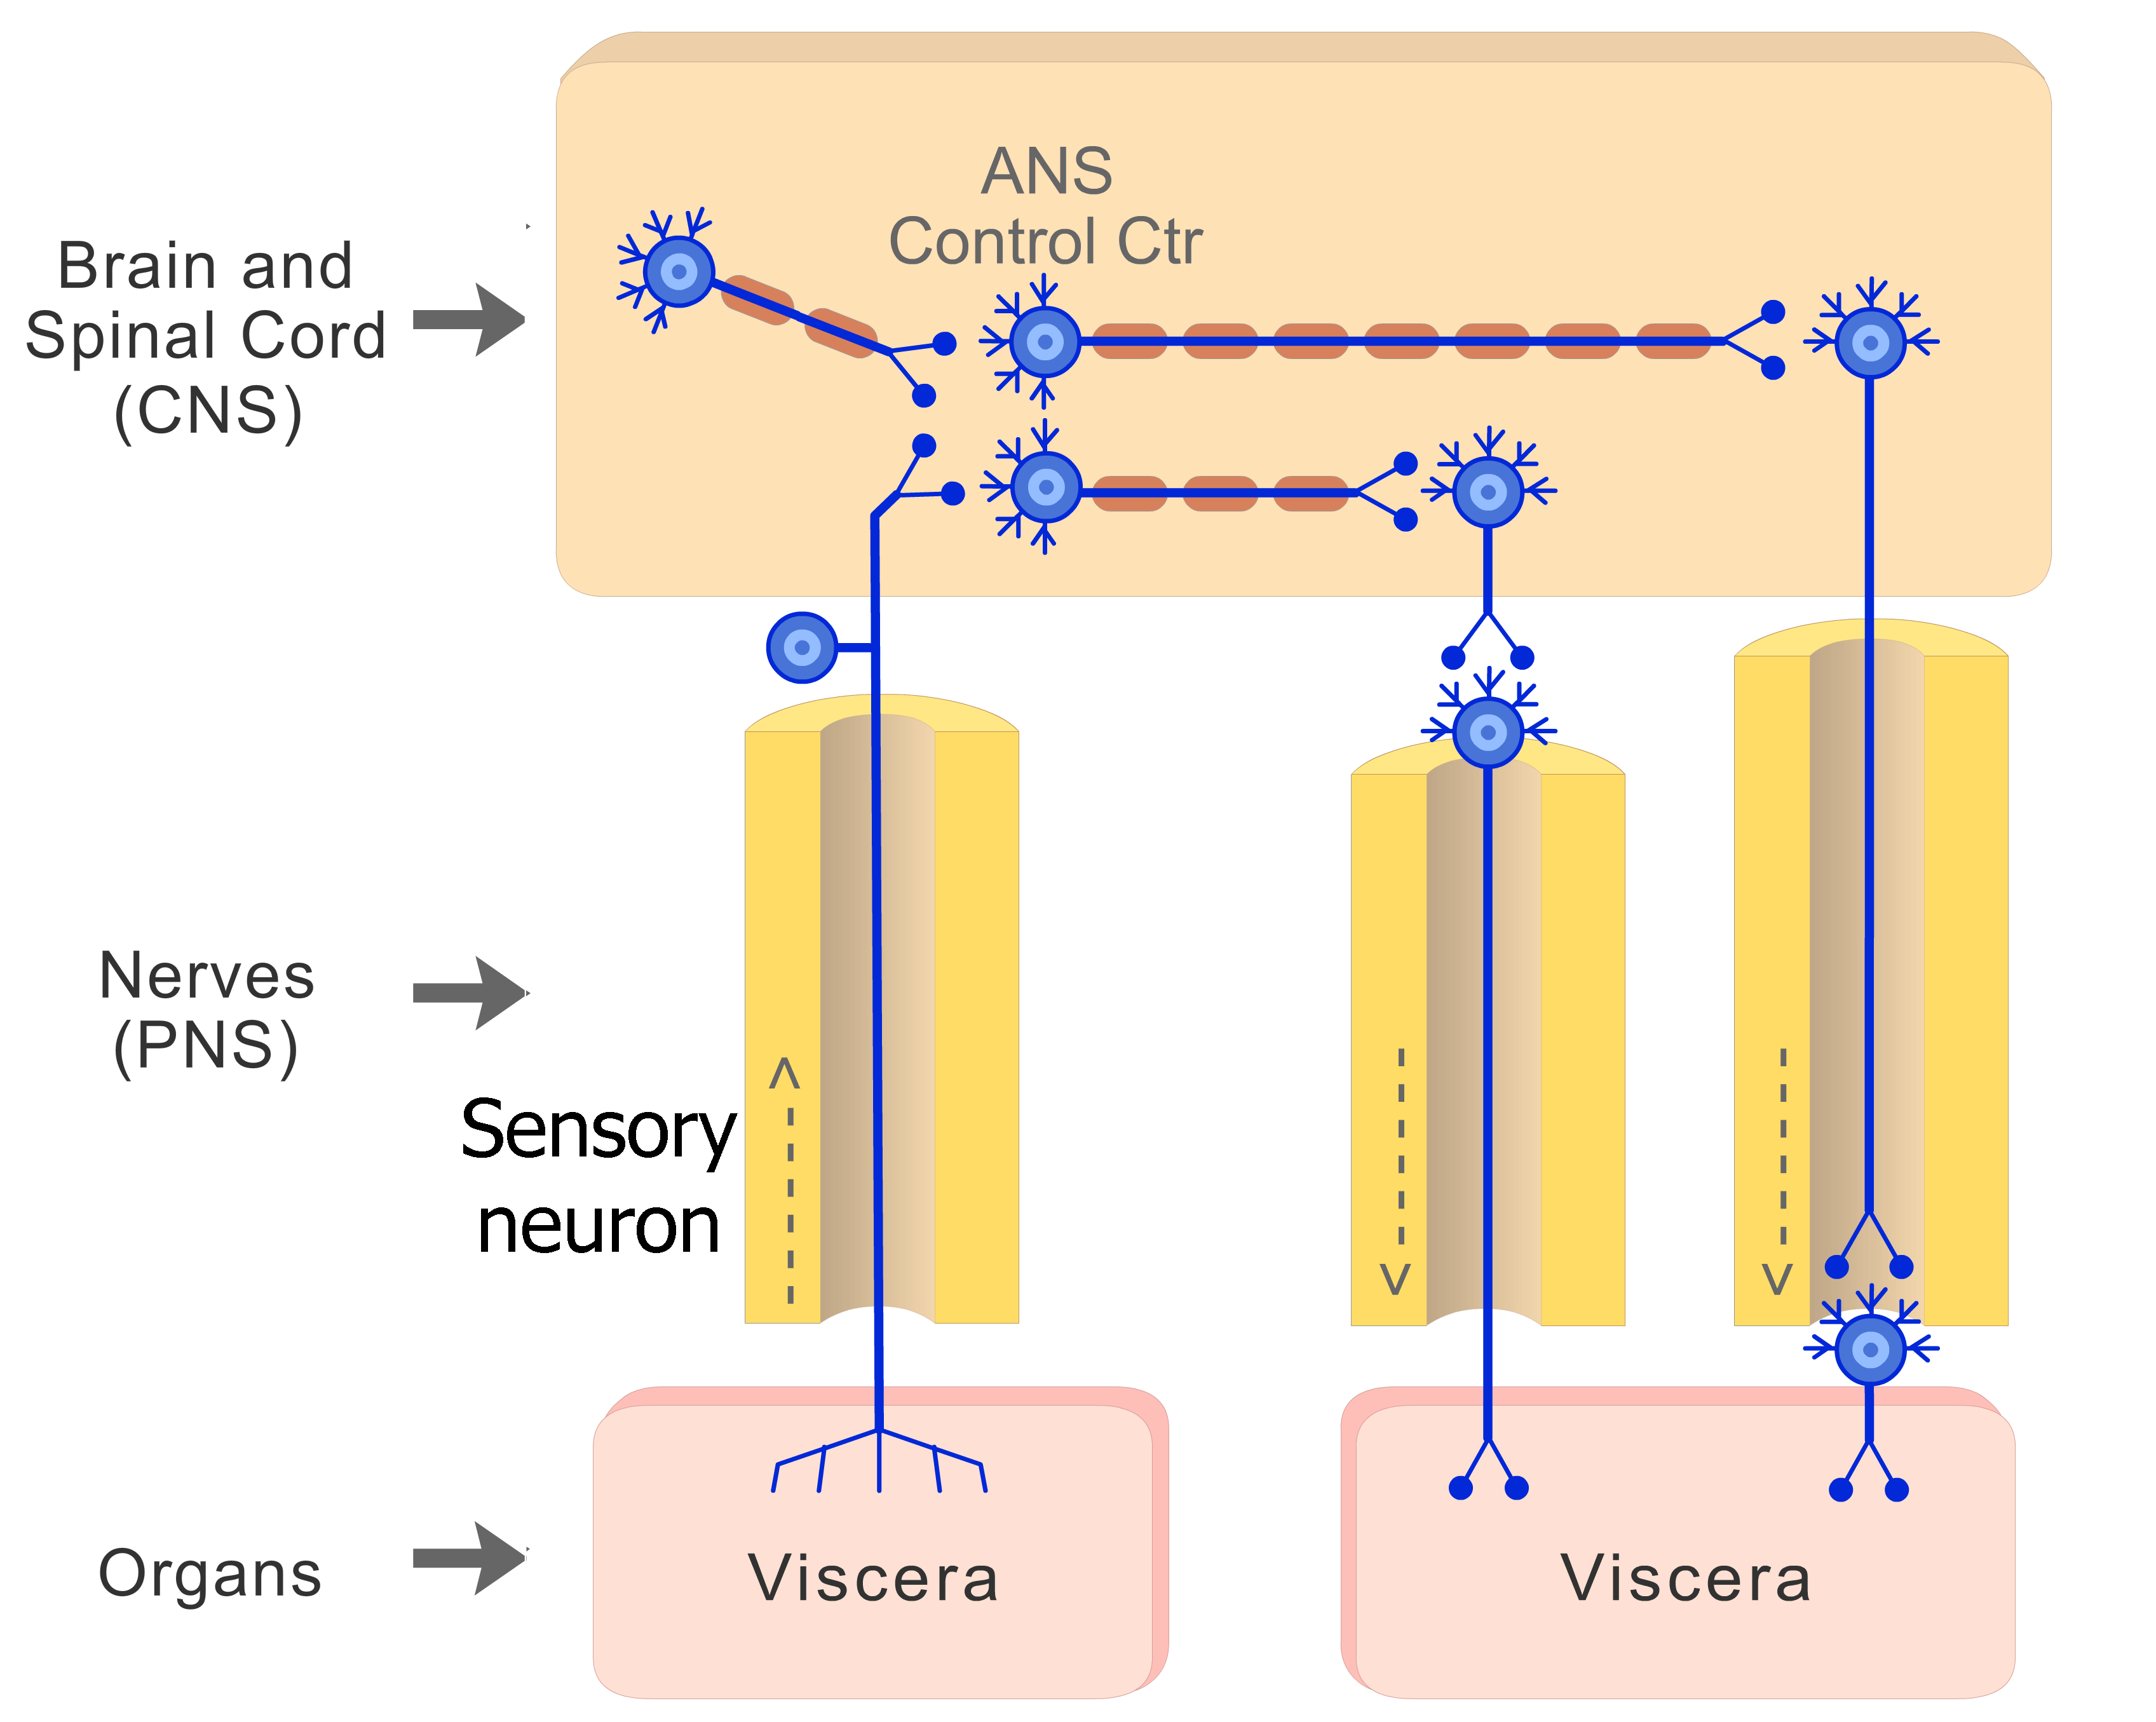 An image showing the stimulation in the viscera generating action potential which moves through sensory neuron (ANS) to reach the higher levels (CNS)